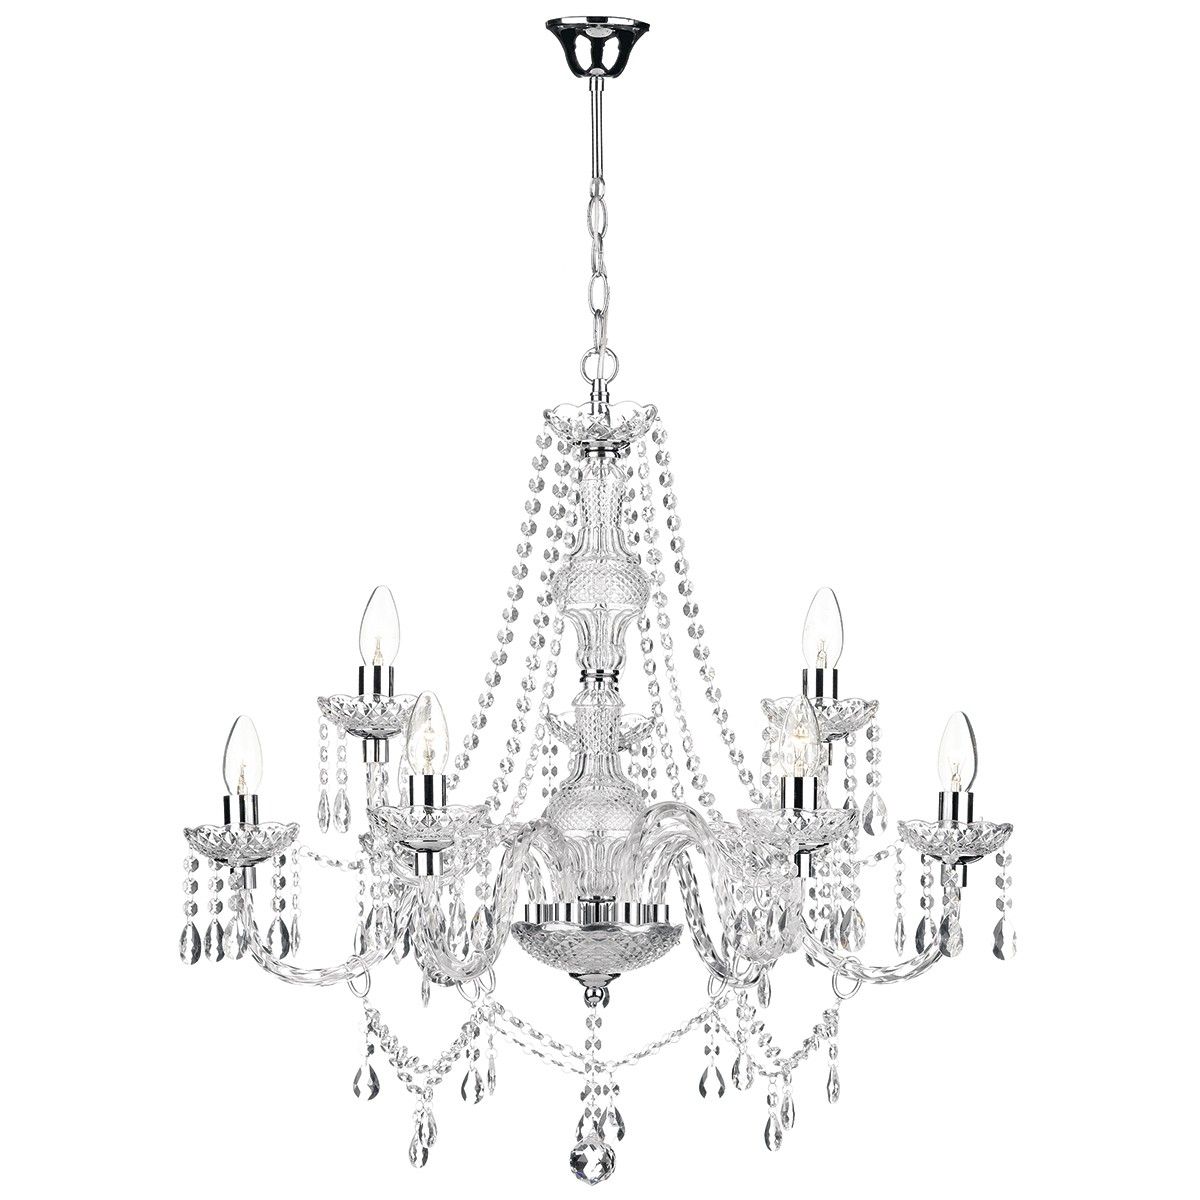 Glass Chandelier Throughout Chrome And Glass Chandeliers (Photo 3 of 25)